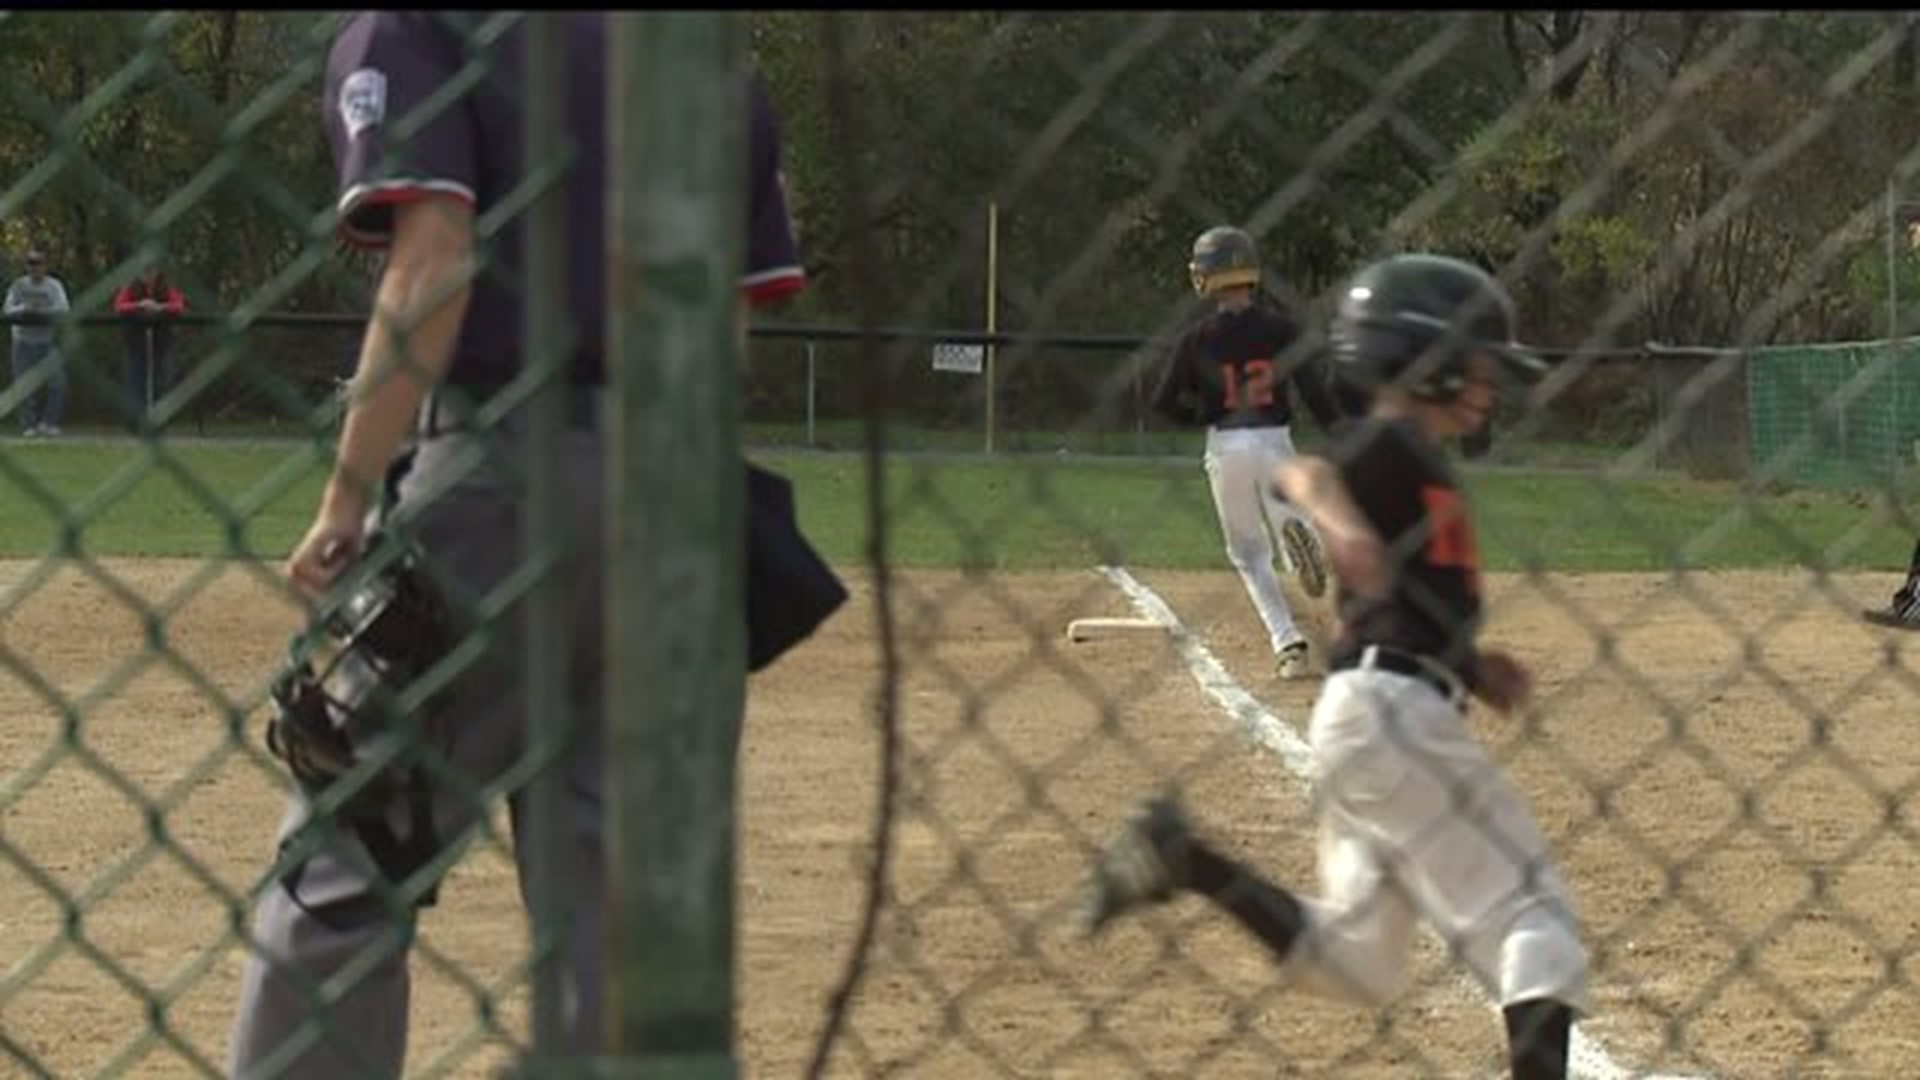 York Little League plays one last game at Shipley Field